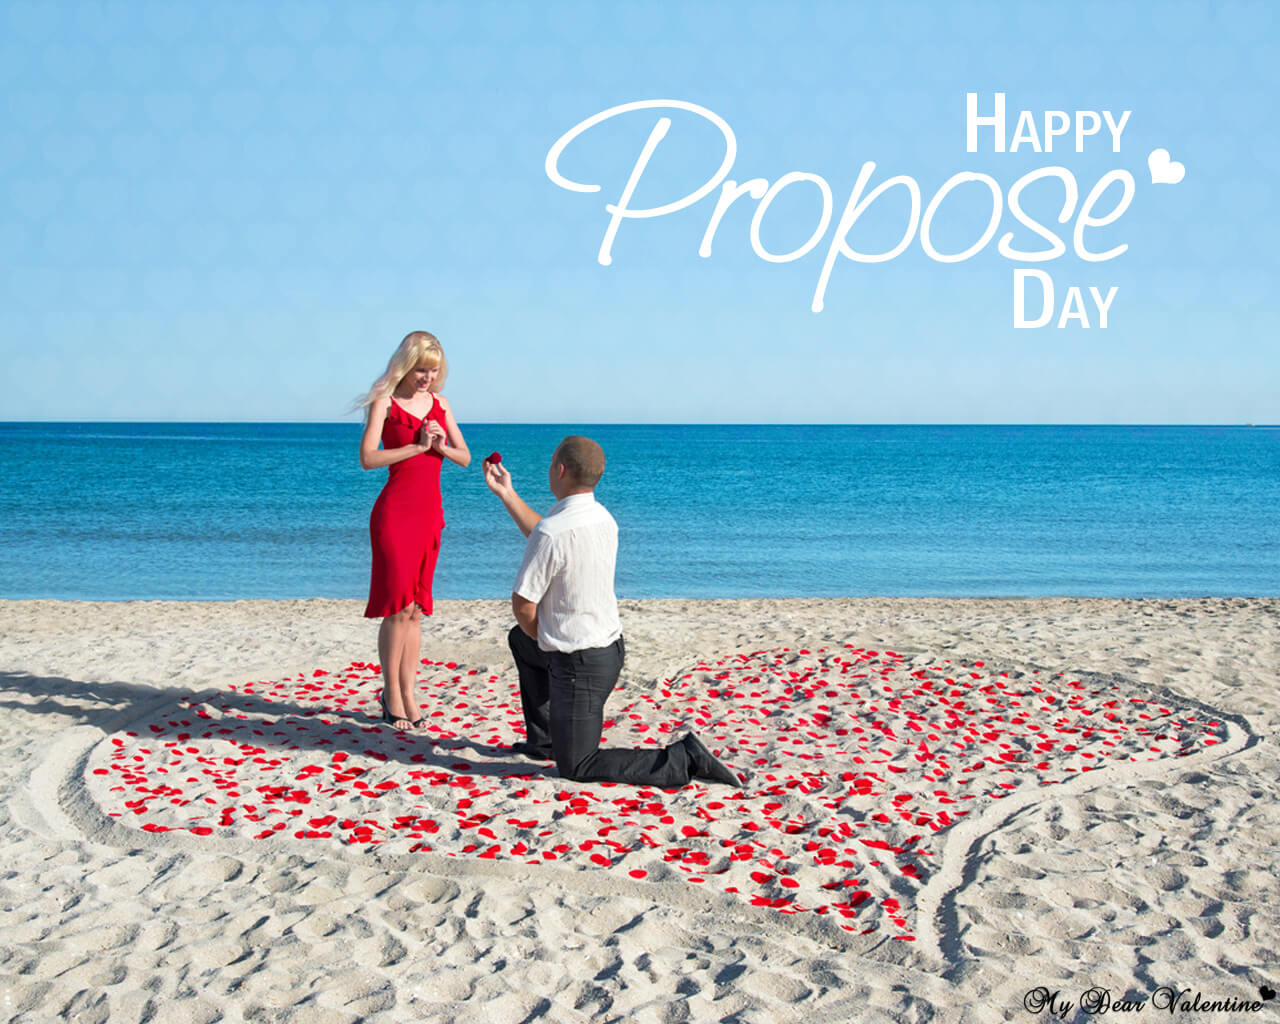 15+ Propose Day Wallpapers to Propose to Girlfriend/Wife/Fiance/Crush